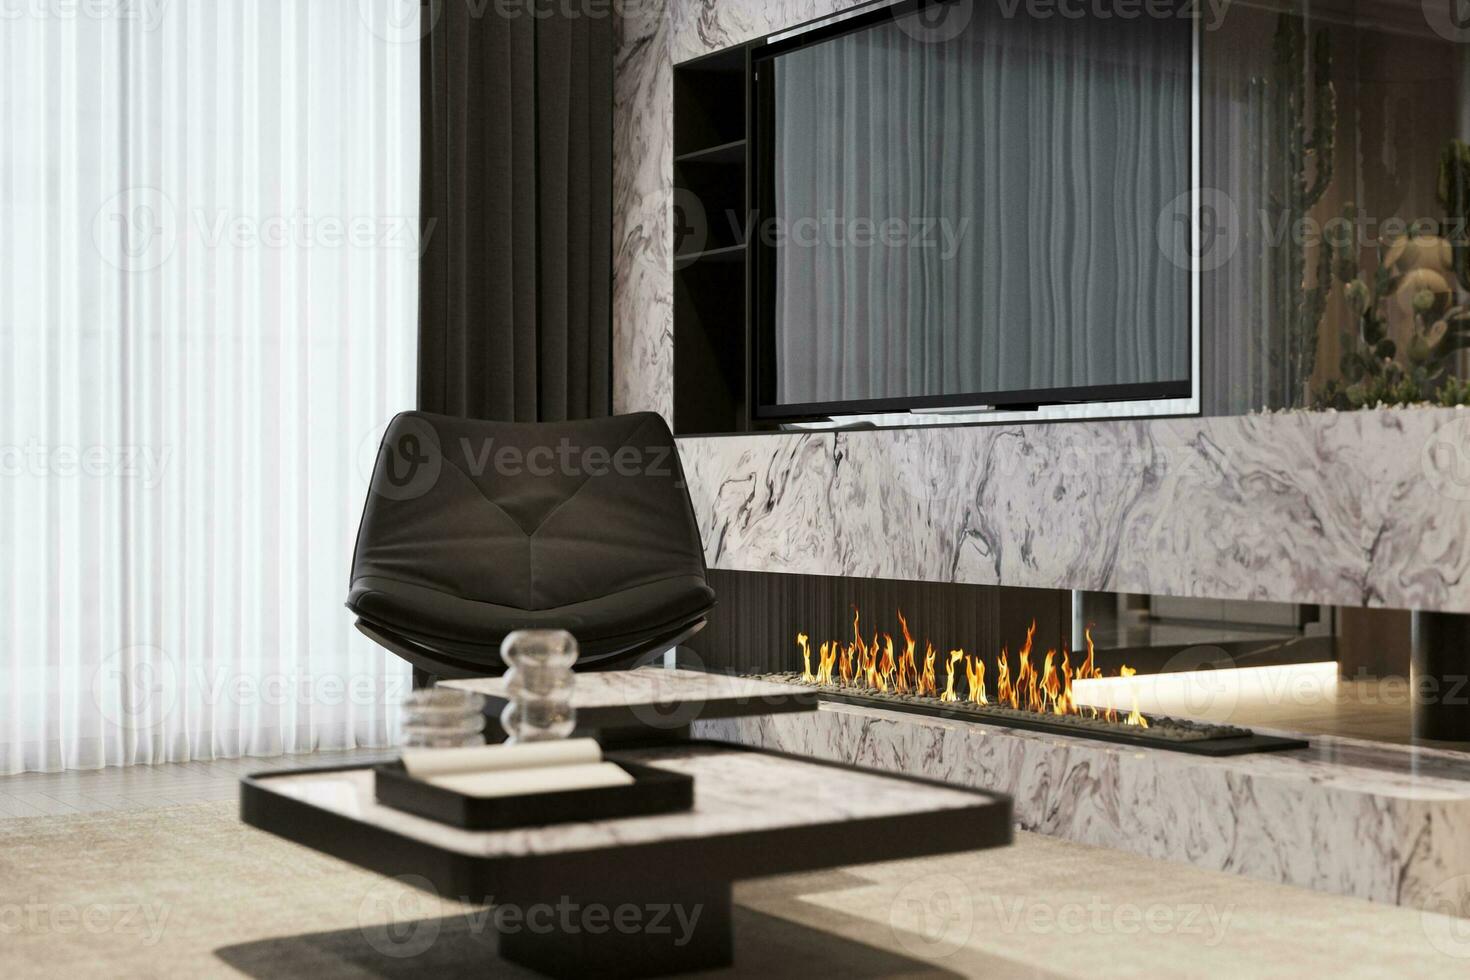 Eames Lounge Chair next to the fireplace and TV Cabinet, 3D rendering photo